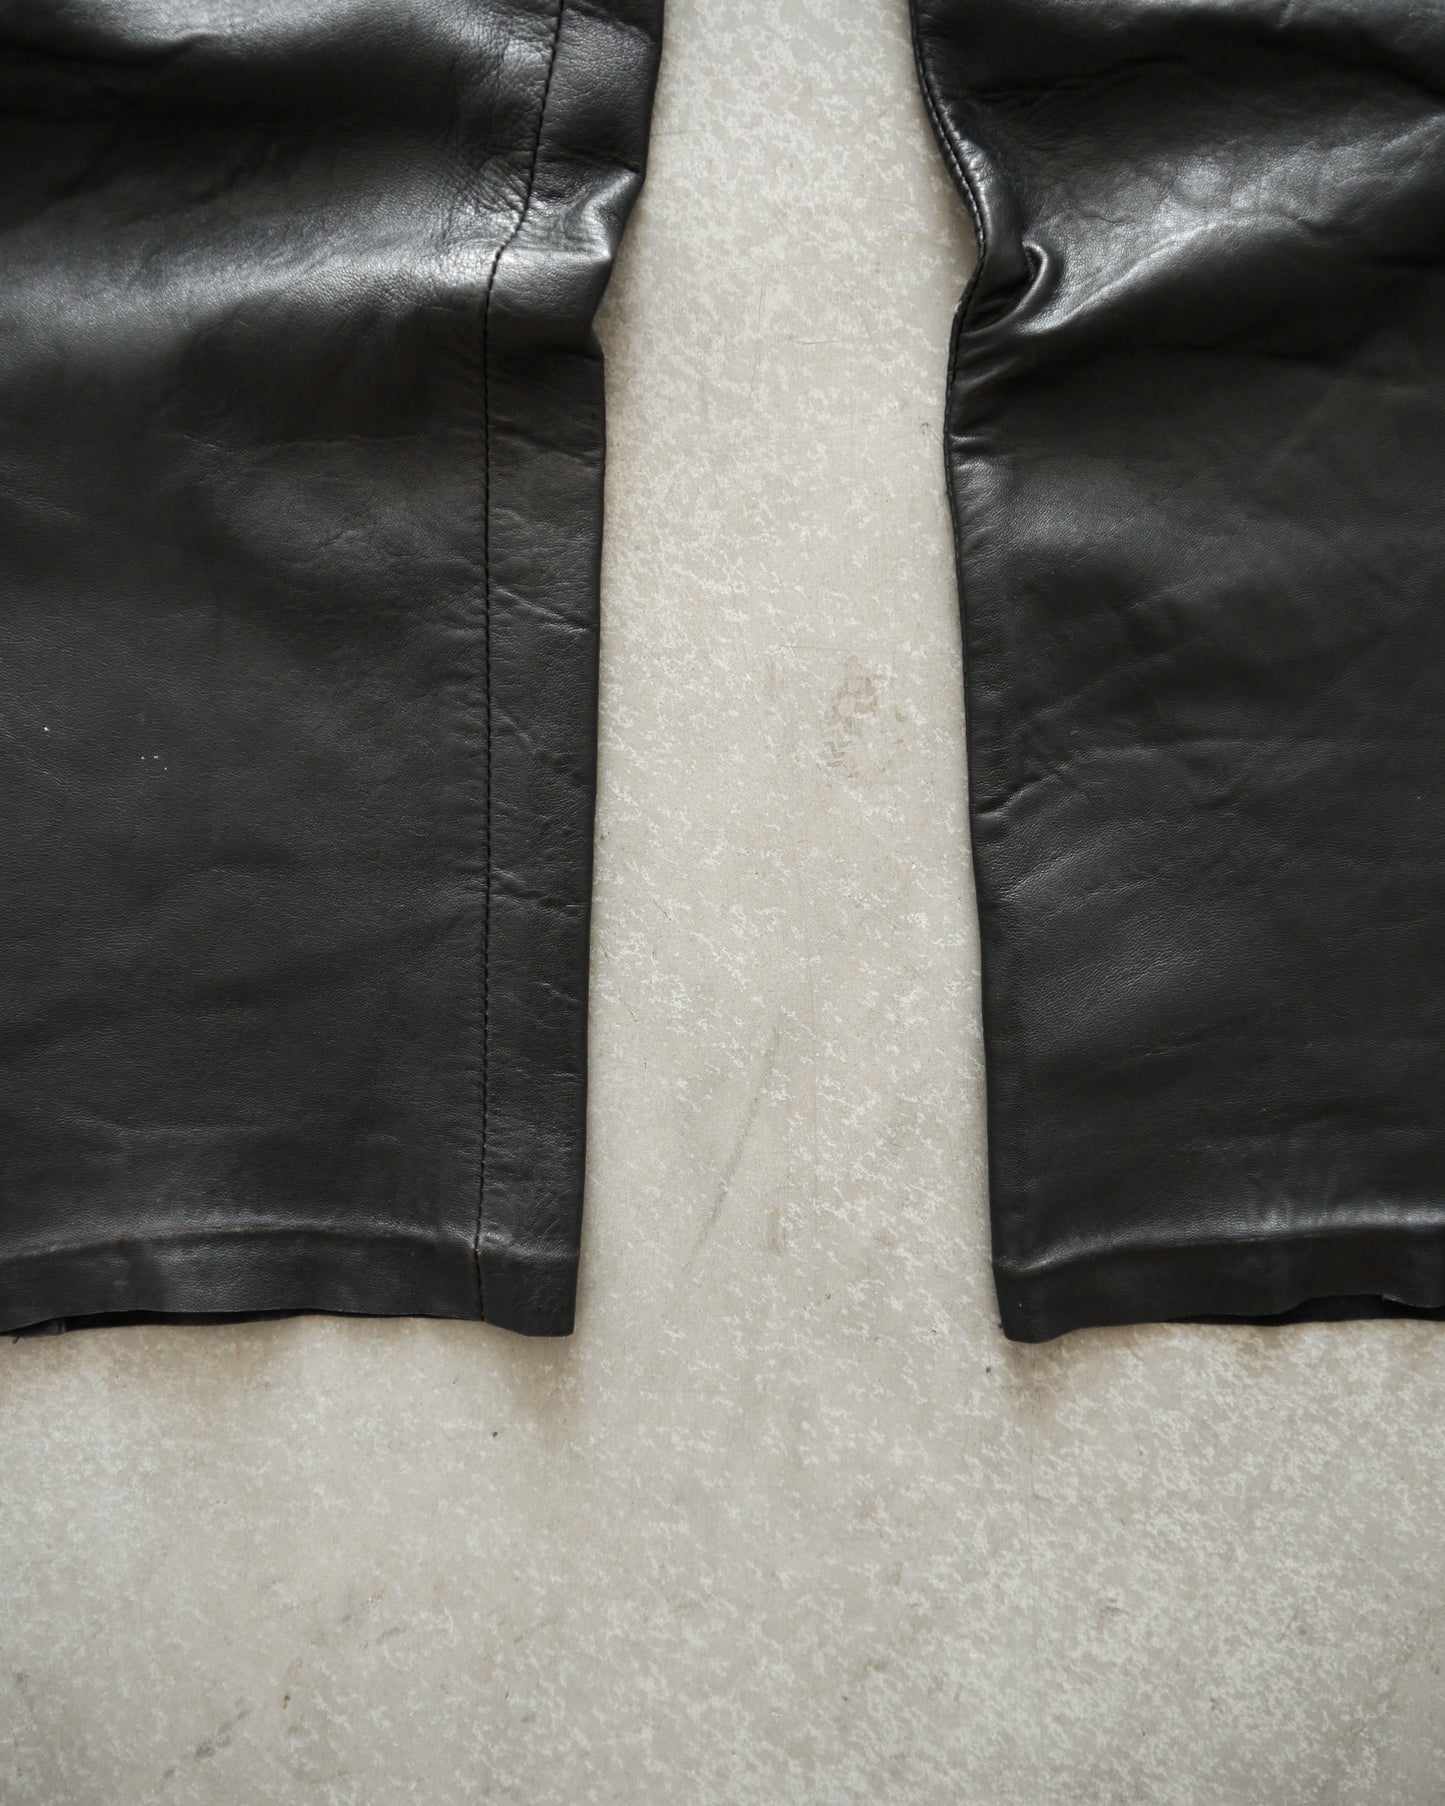 80s French Artisanal Black Leather Pants (29x29)